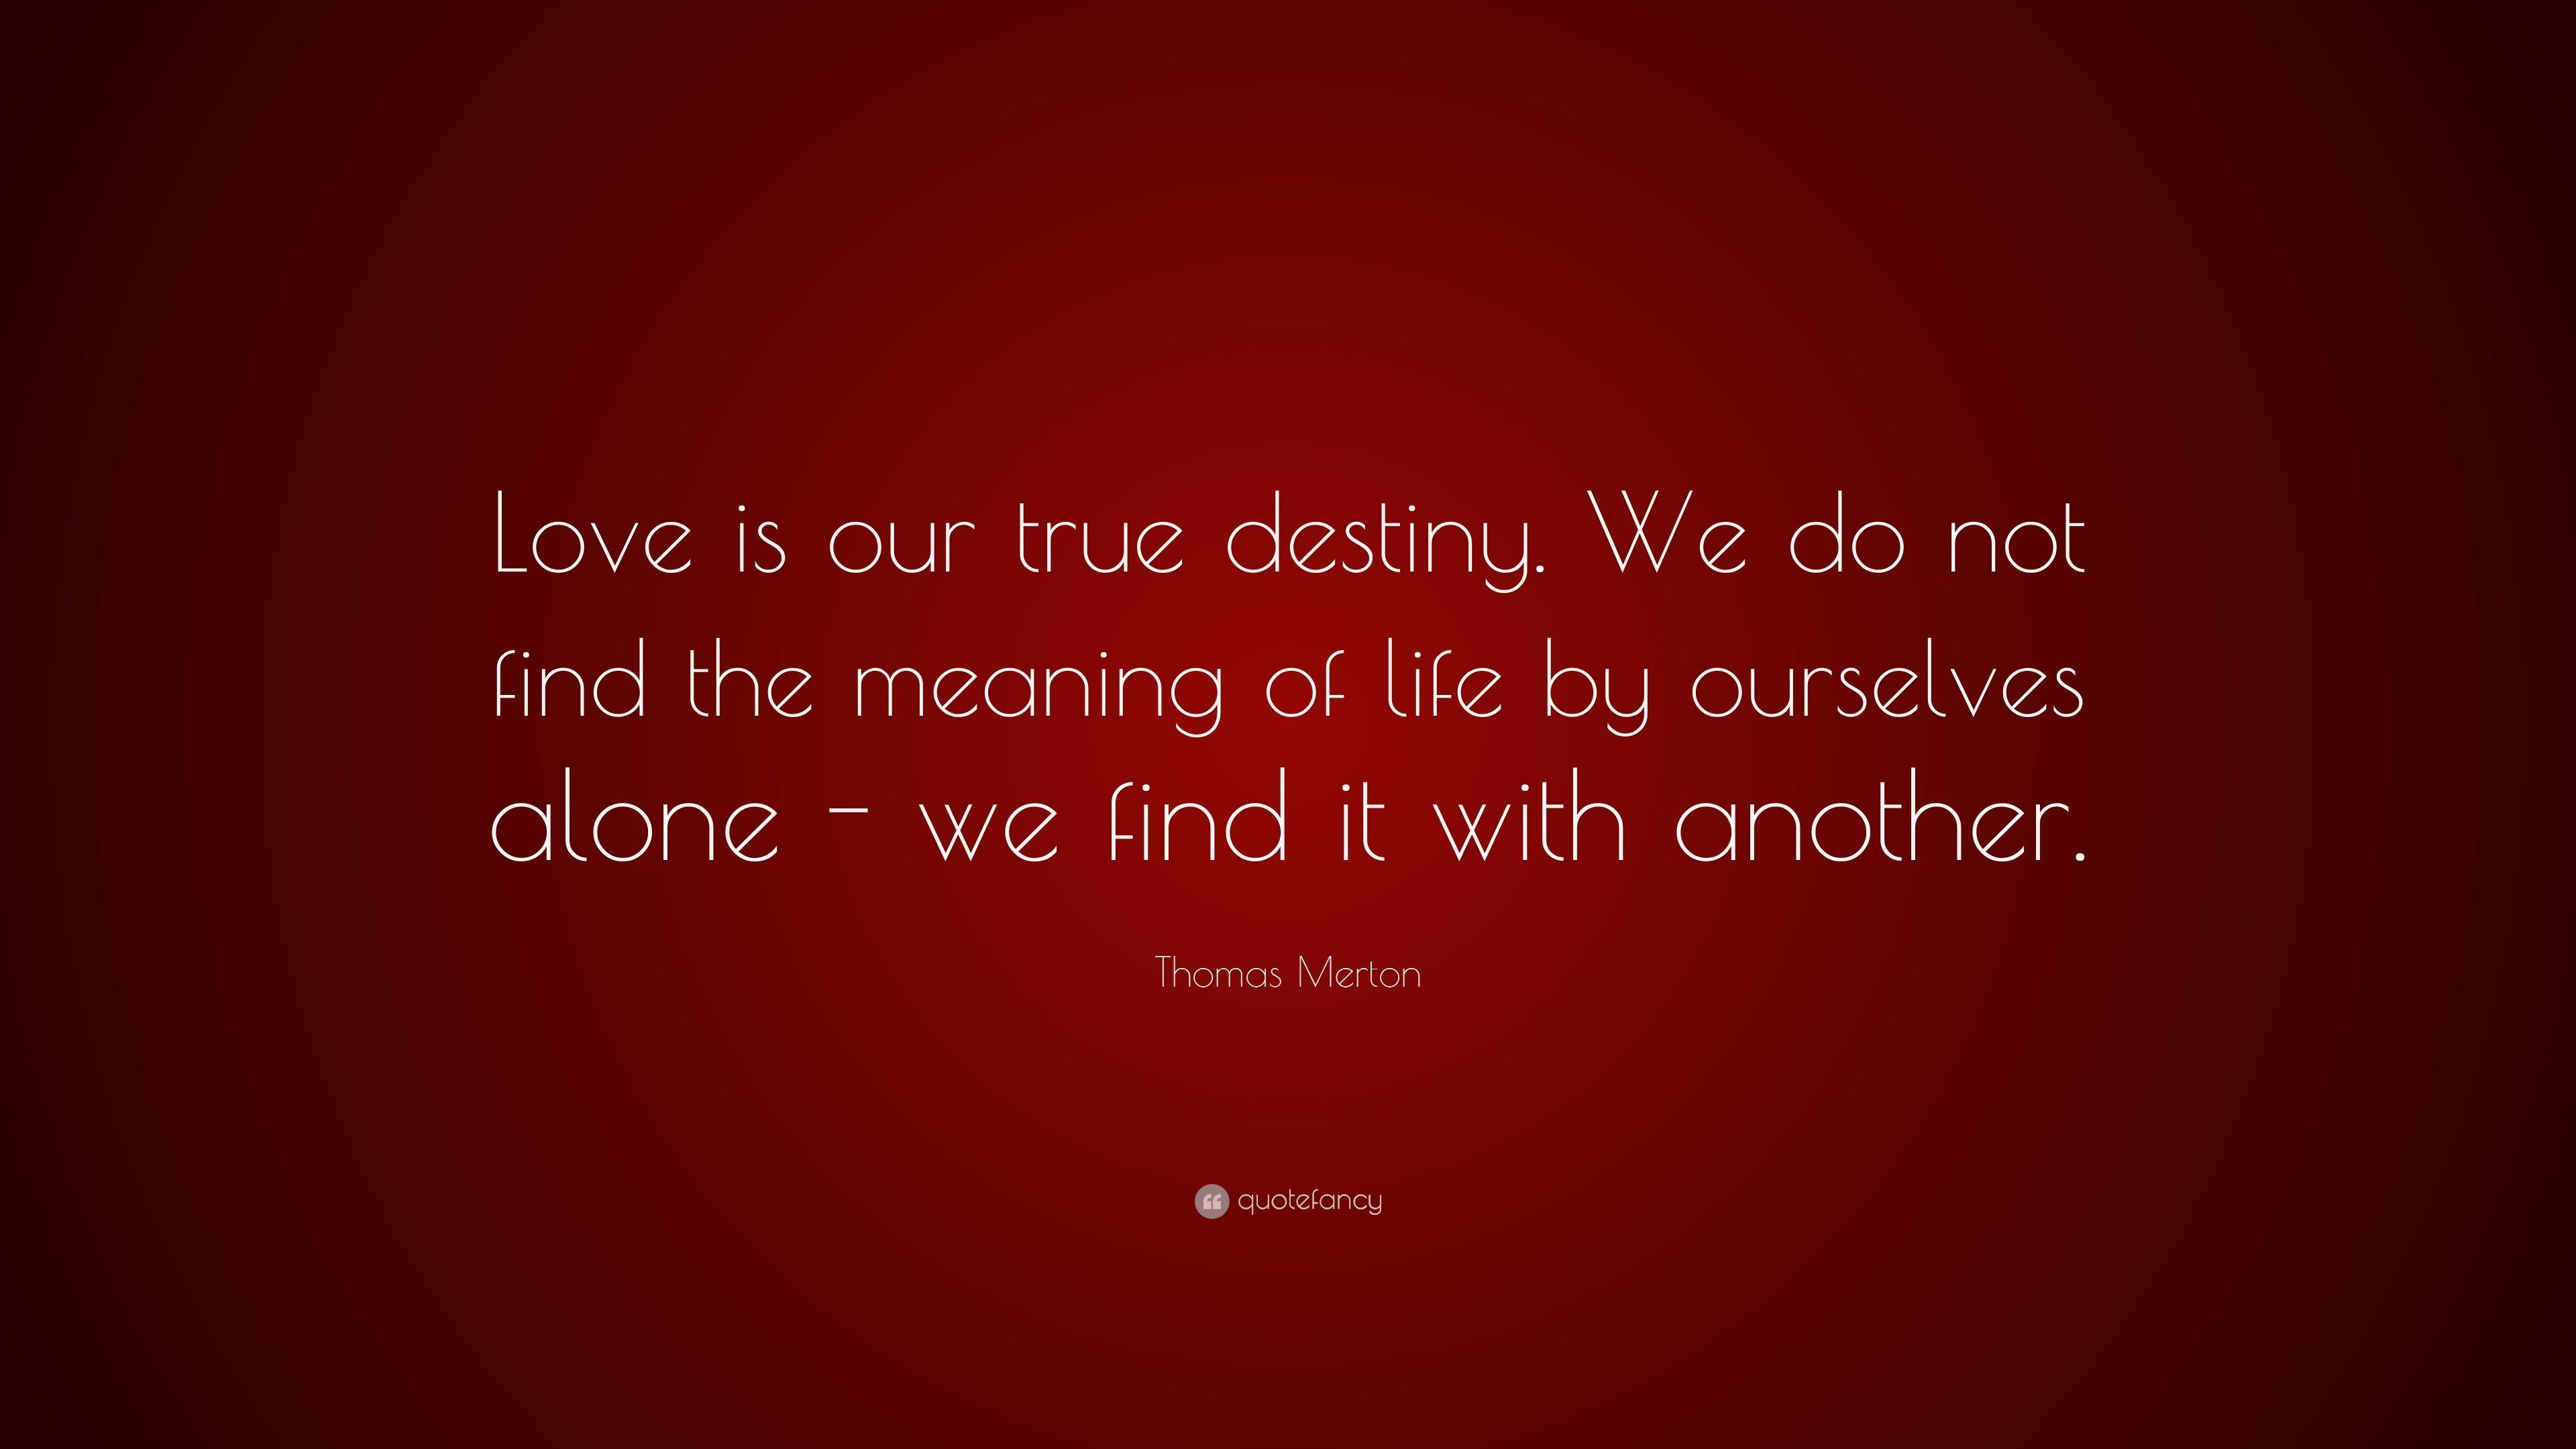 Thomas Merton Quote: “Love is our true destiny. We do not find